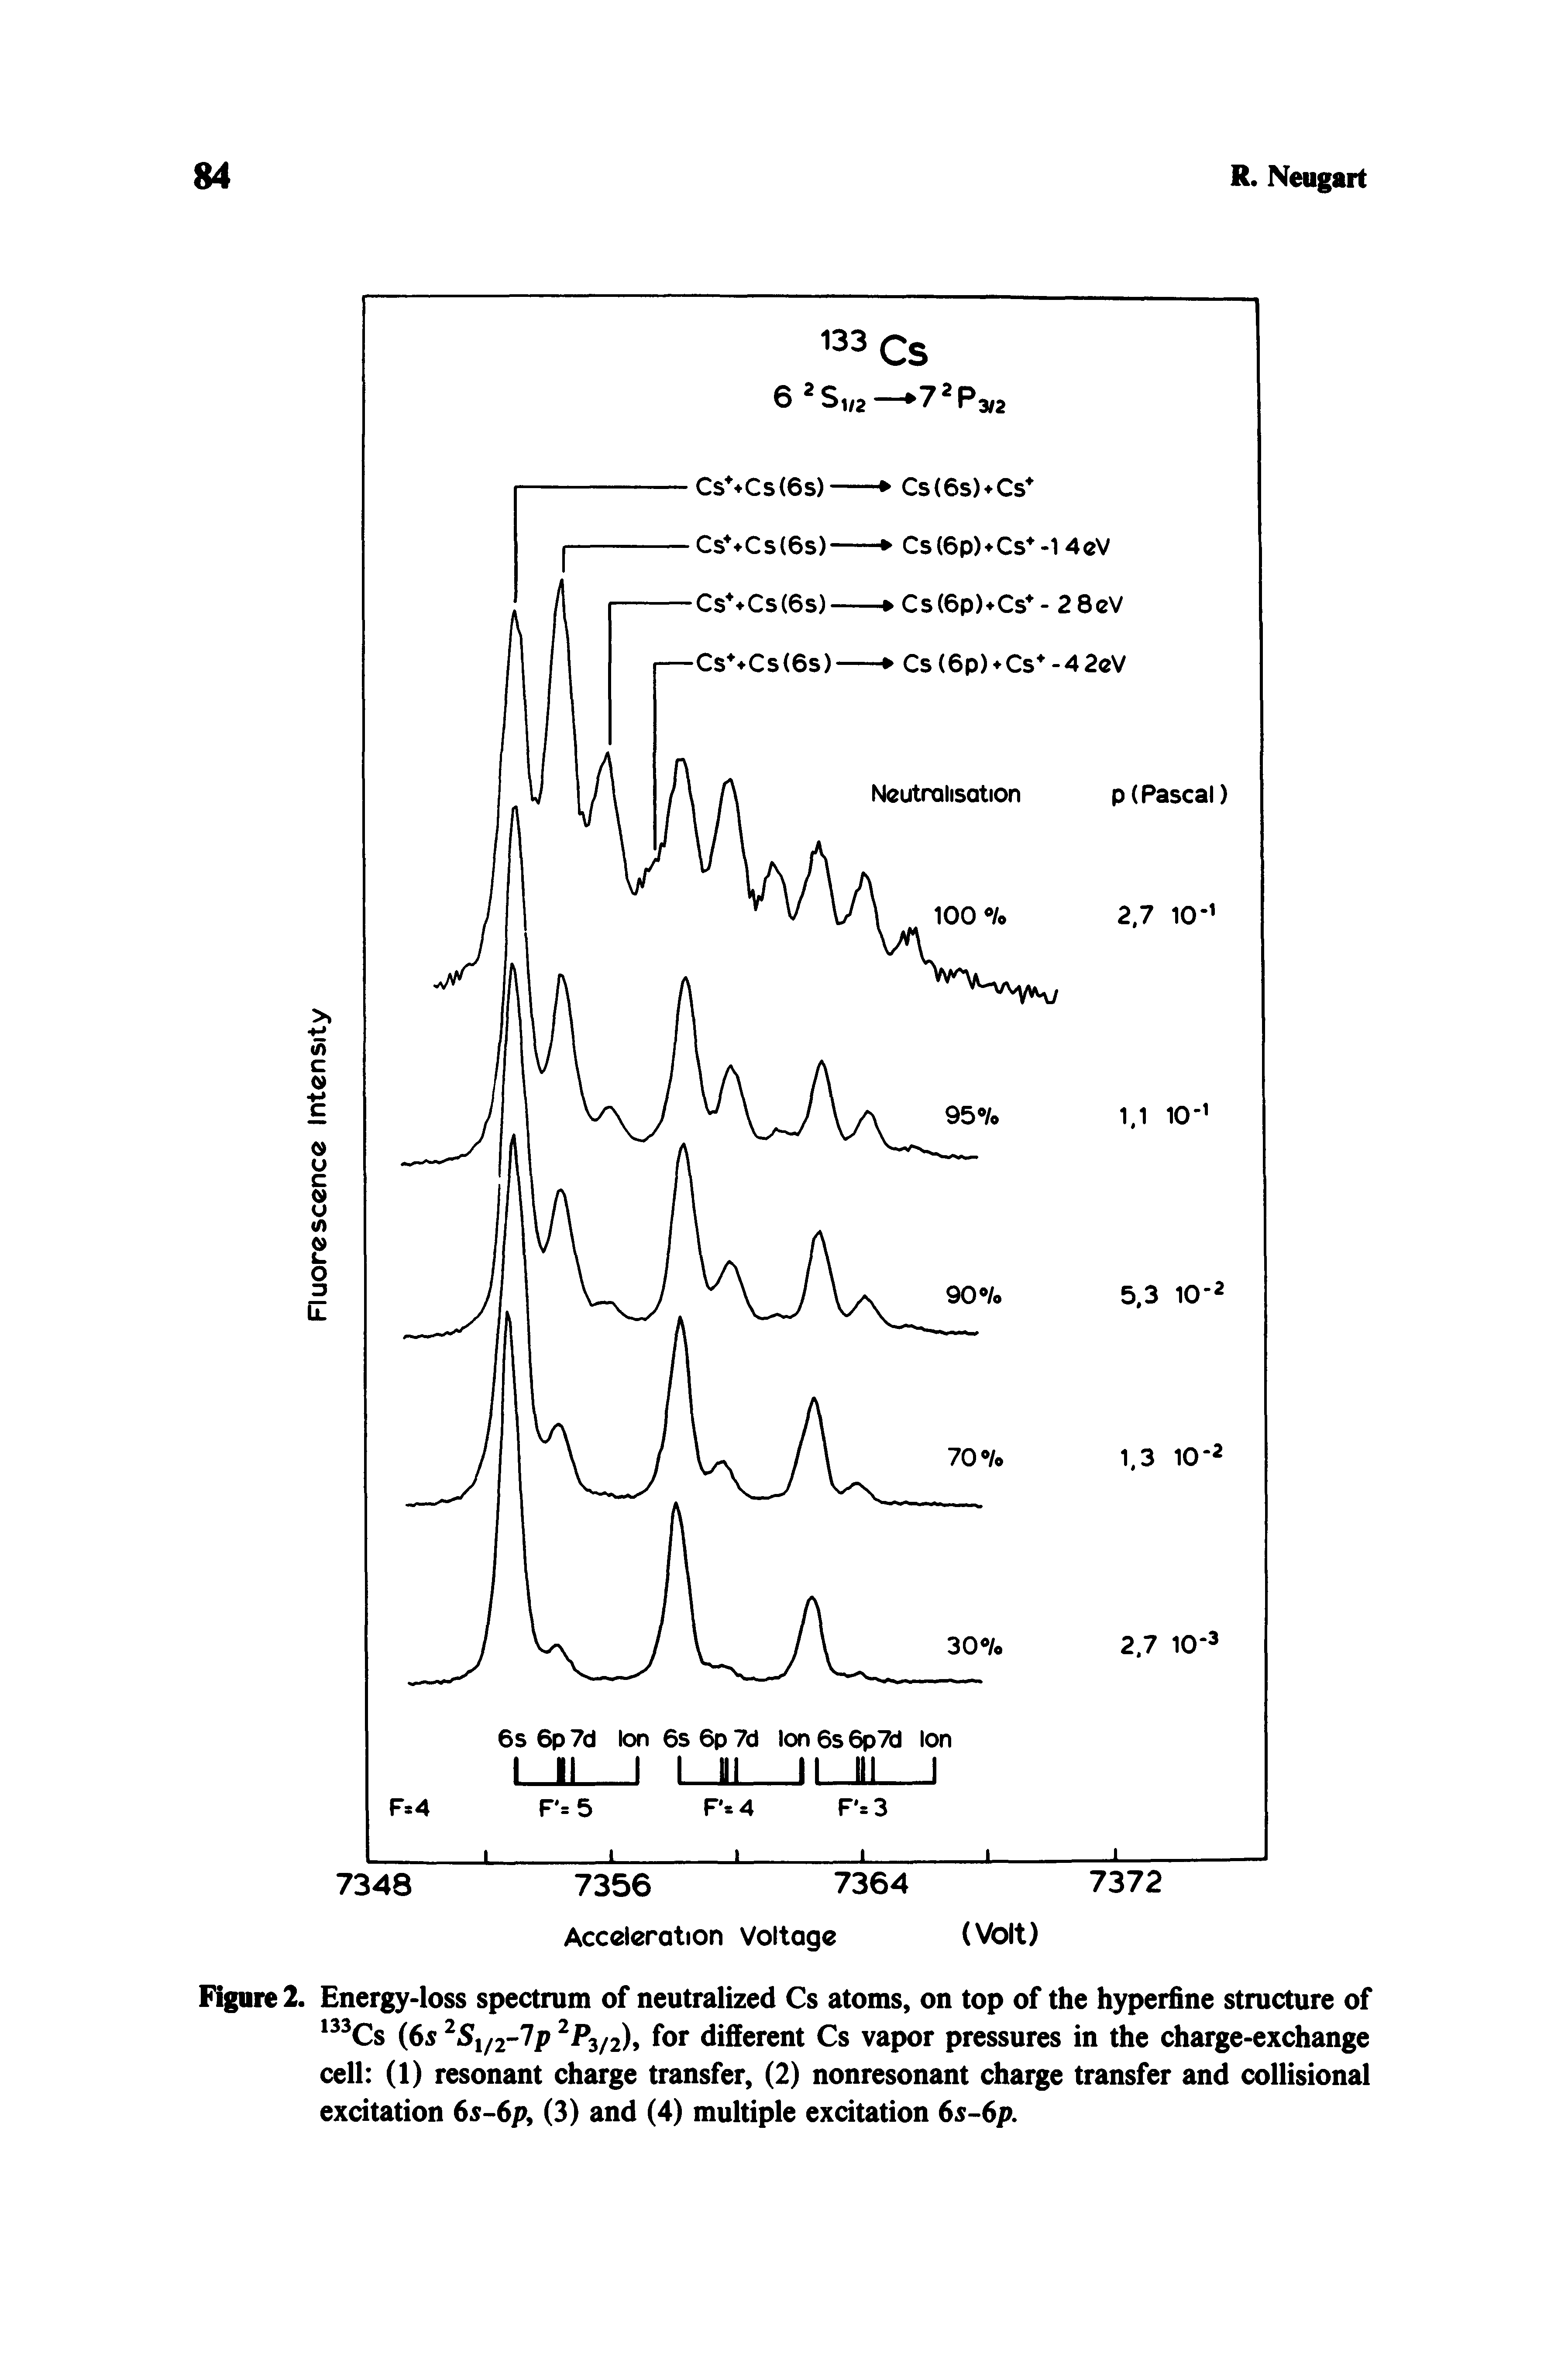 Figure 2. Energy-loss spectrum of neutralized Cs atoms, on top of the hyperfine structure of Cs (6s Sif2-lp 3/2), for different Cs vapor pressures in the charge-exchange cell (1) resonant charge transfer, (2) nonresonant charge transfer and collisional excitation 6s 6p, (3) and (4) multiple excitation 6s 6p.